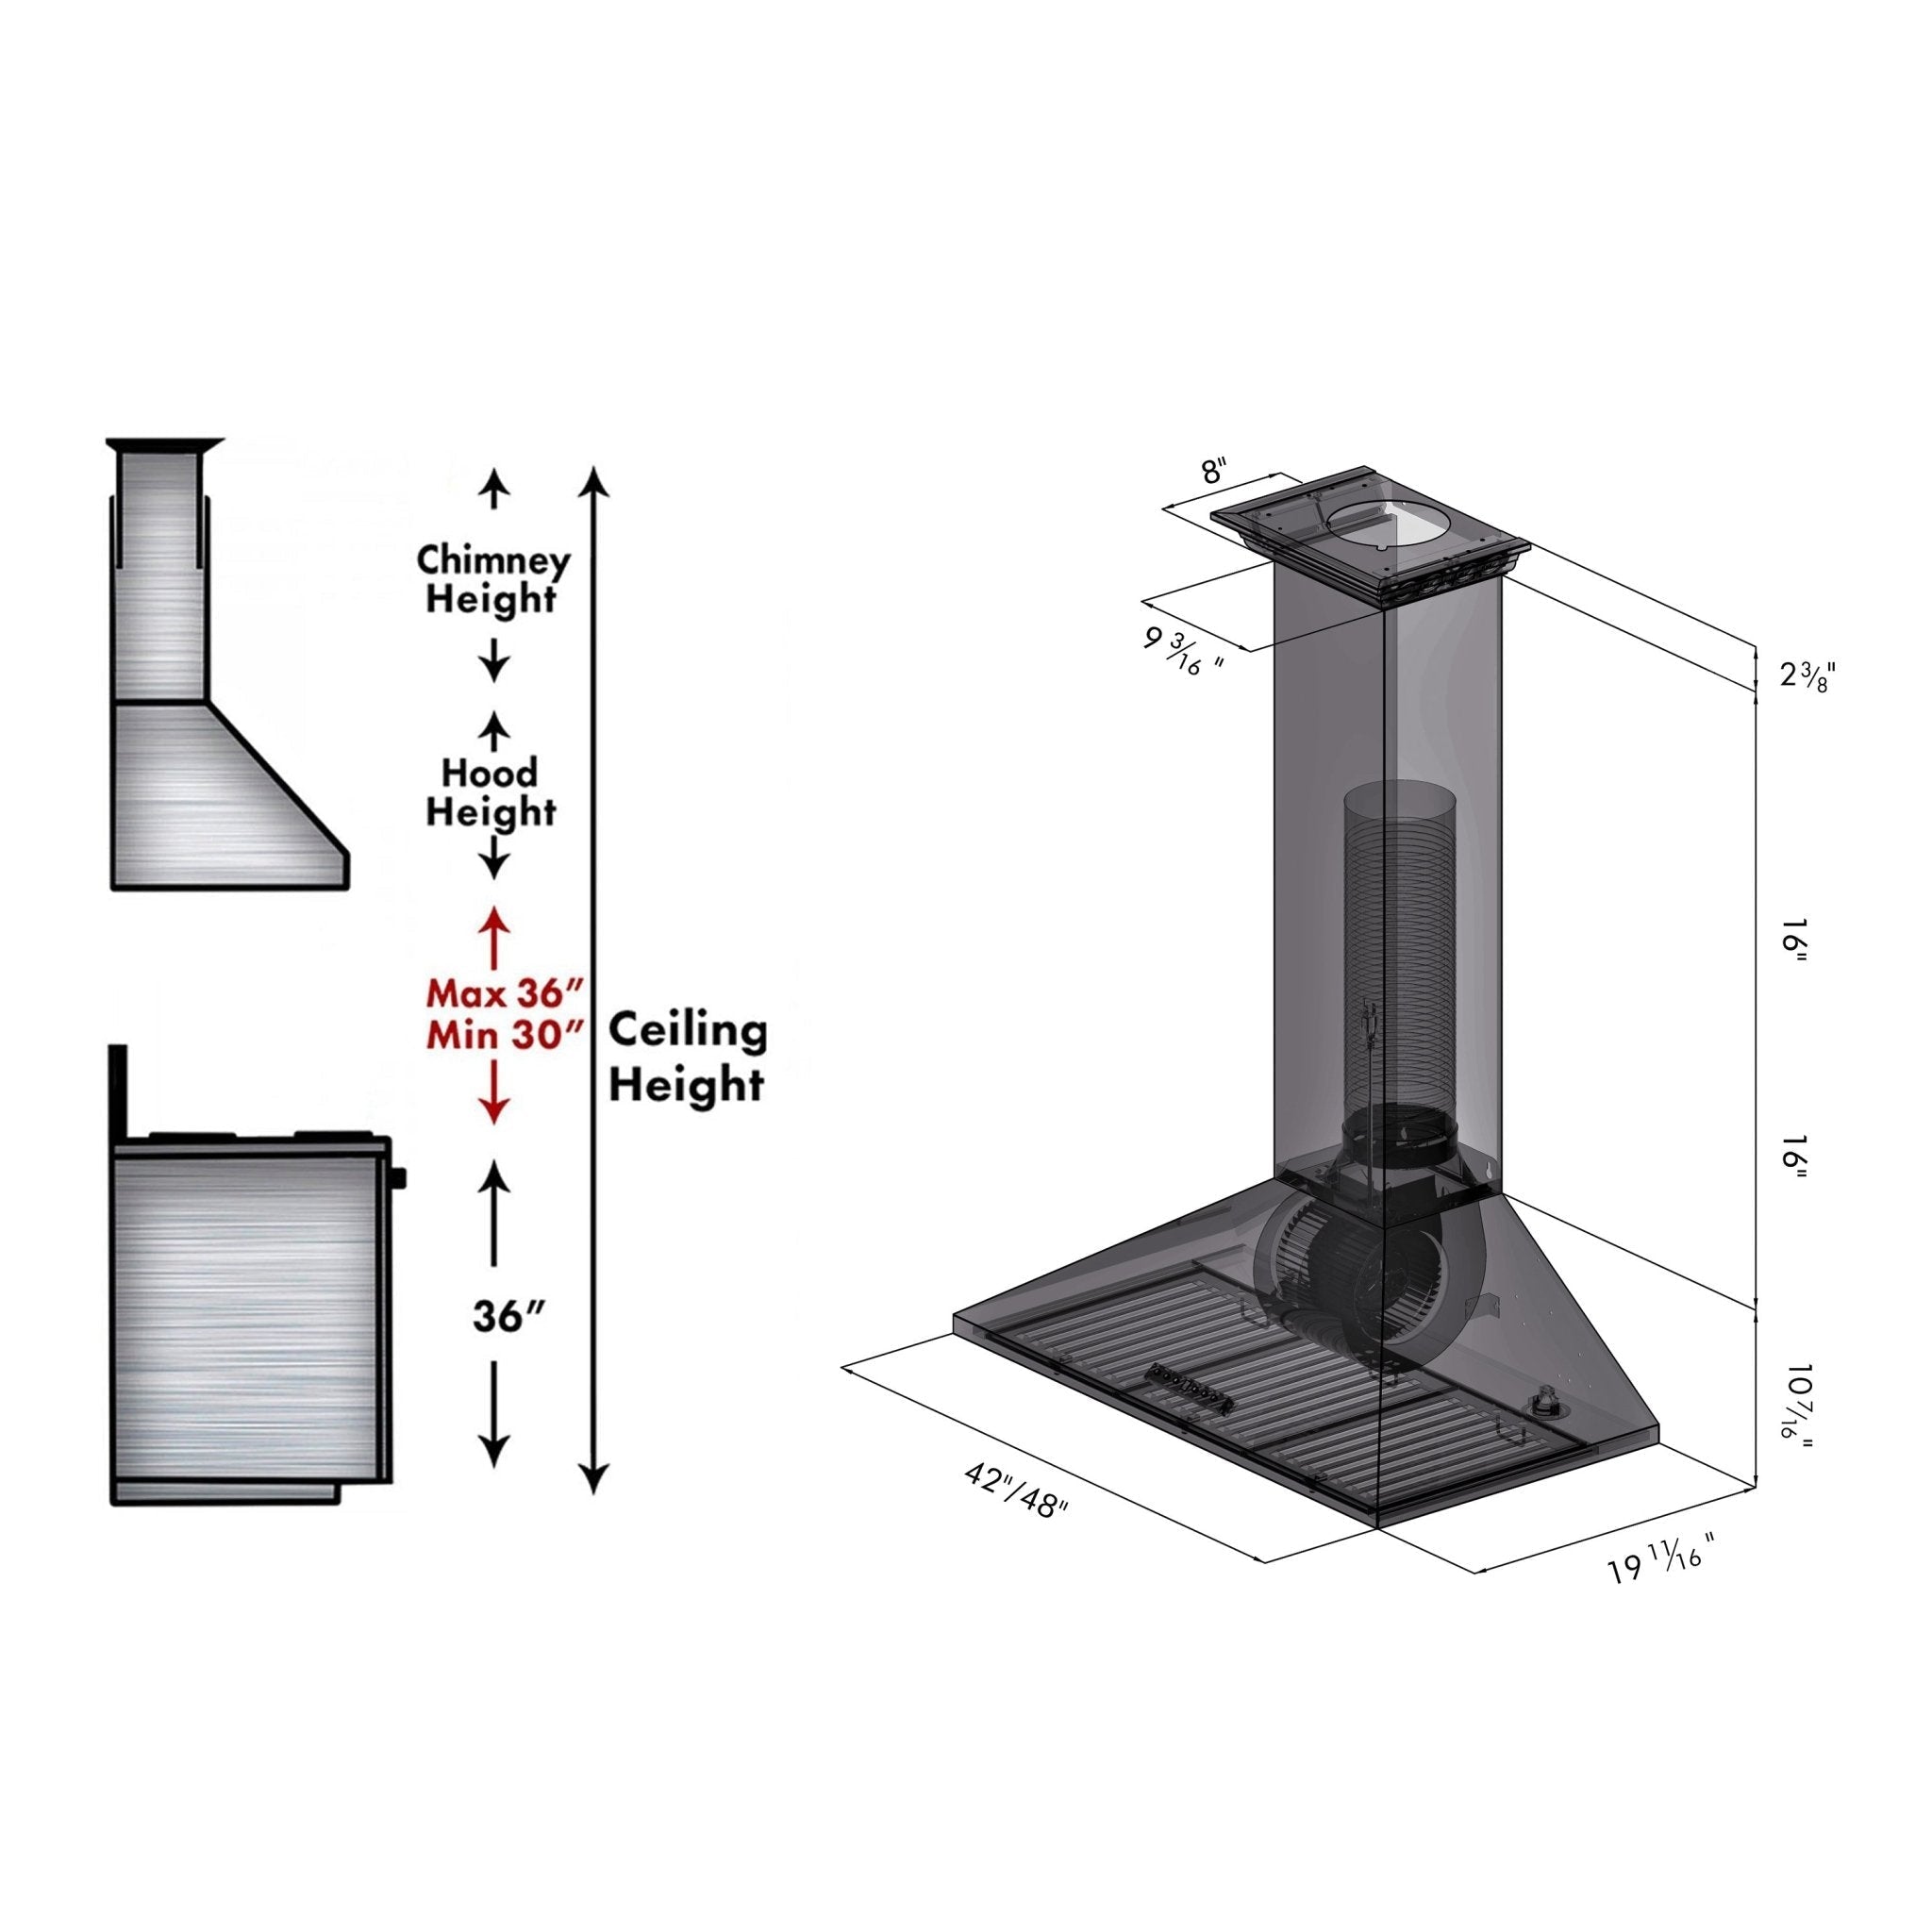 ZLINE 48" Convertible Vent Wall Mount Range Hood in Stainless Steel with Crown Molding (KL2CRN-48)